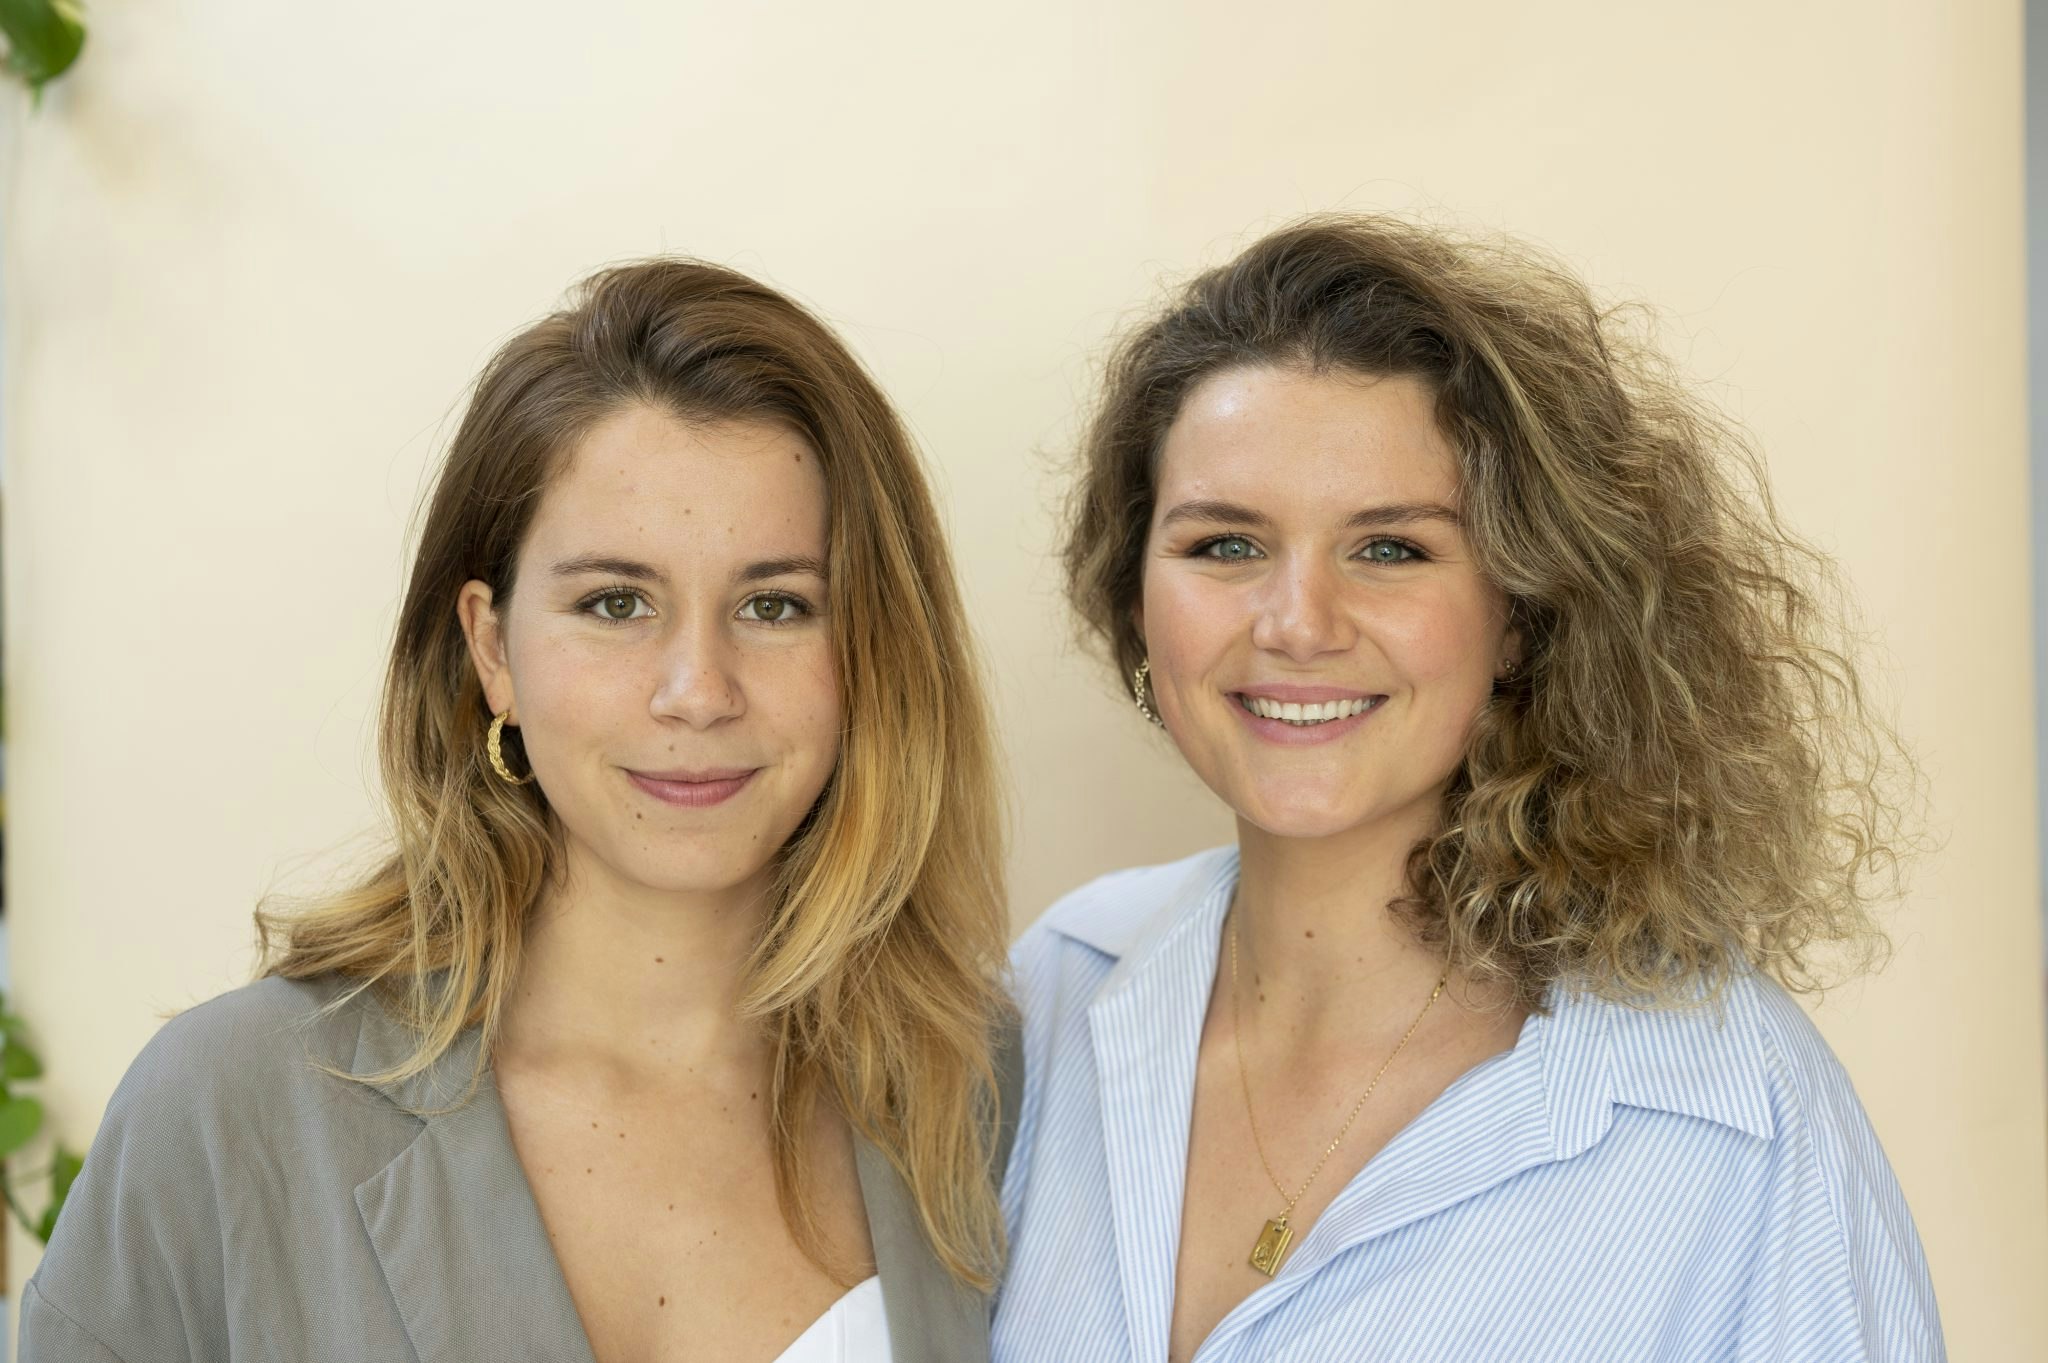 These sisters quit their jobs to build the ‘Fintech Duolingo’